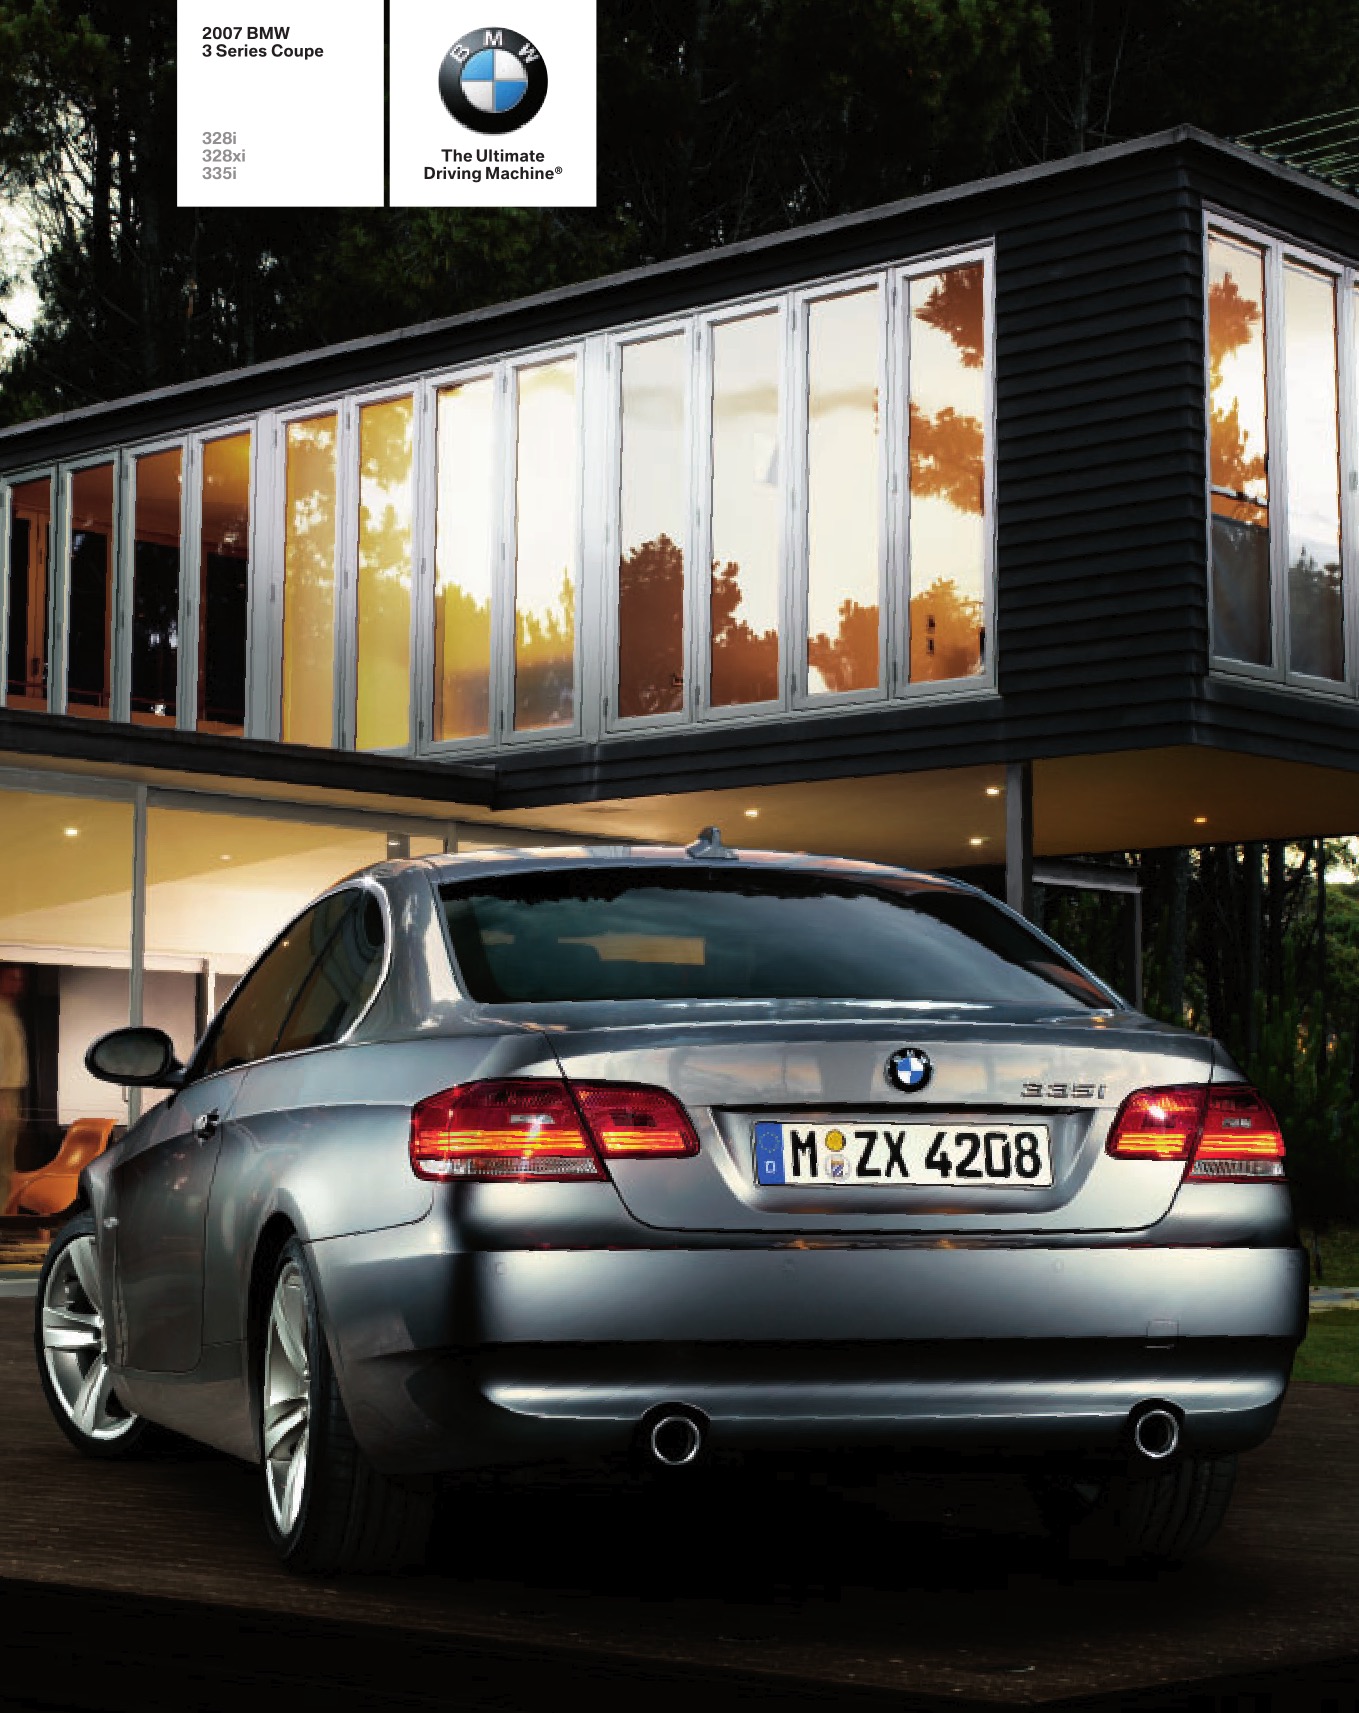 2007 BMW 3-Series Coupe Brochure